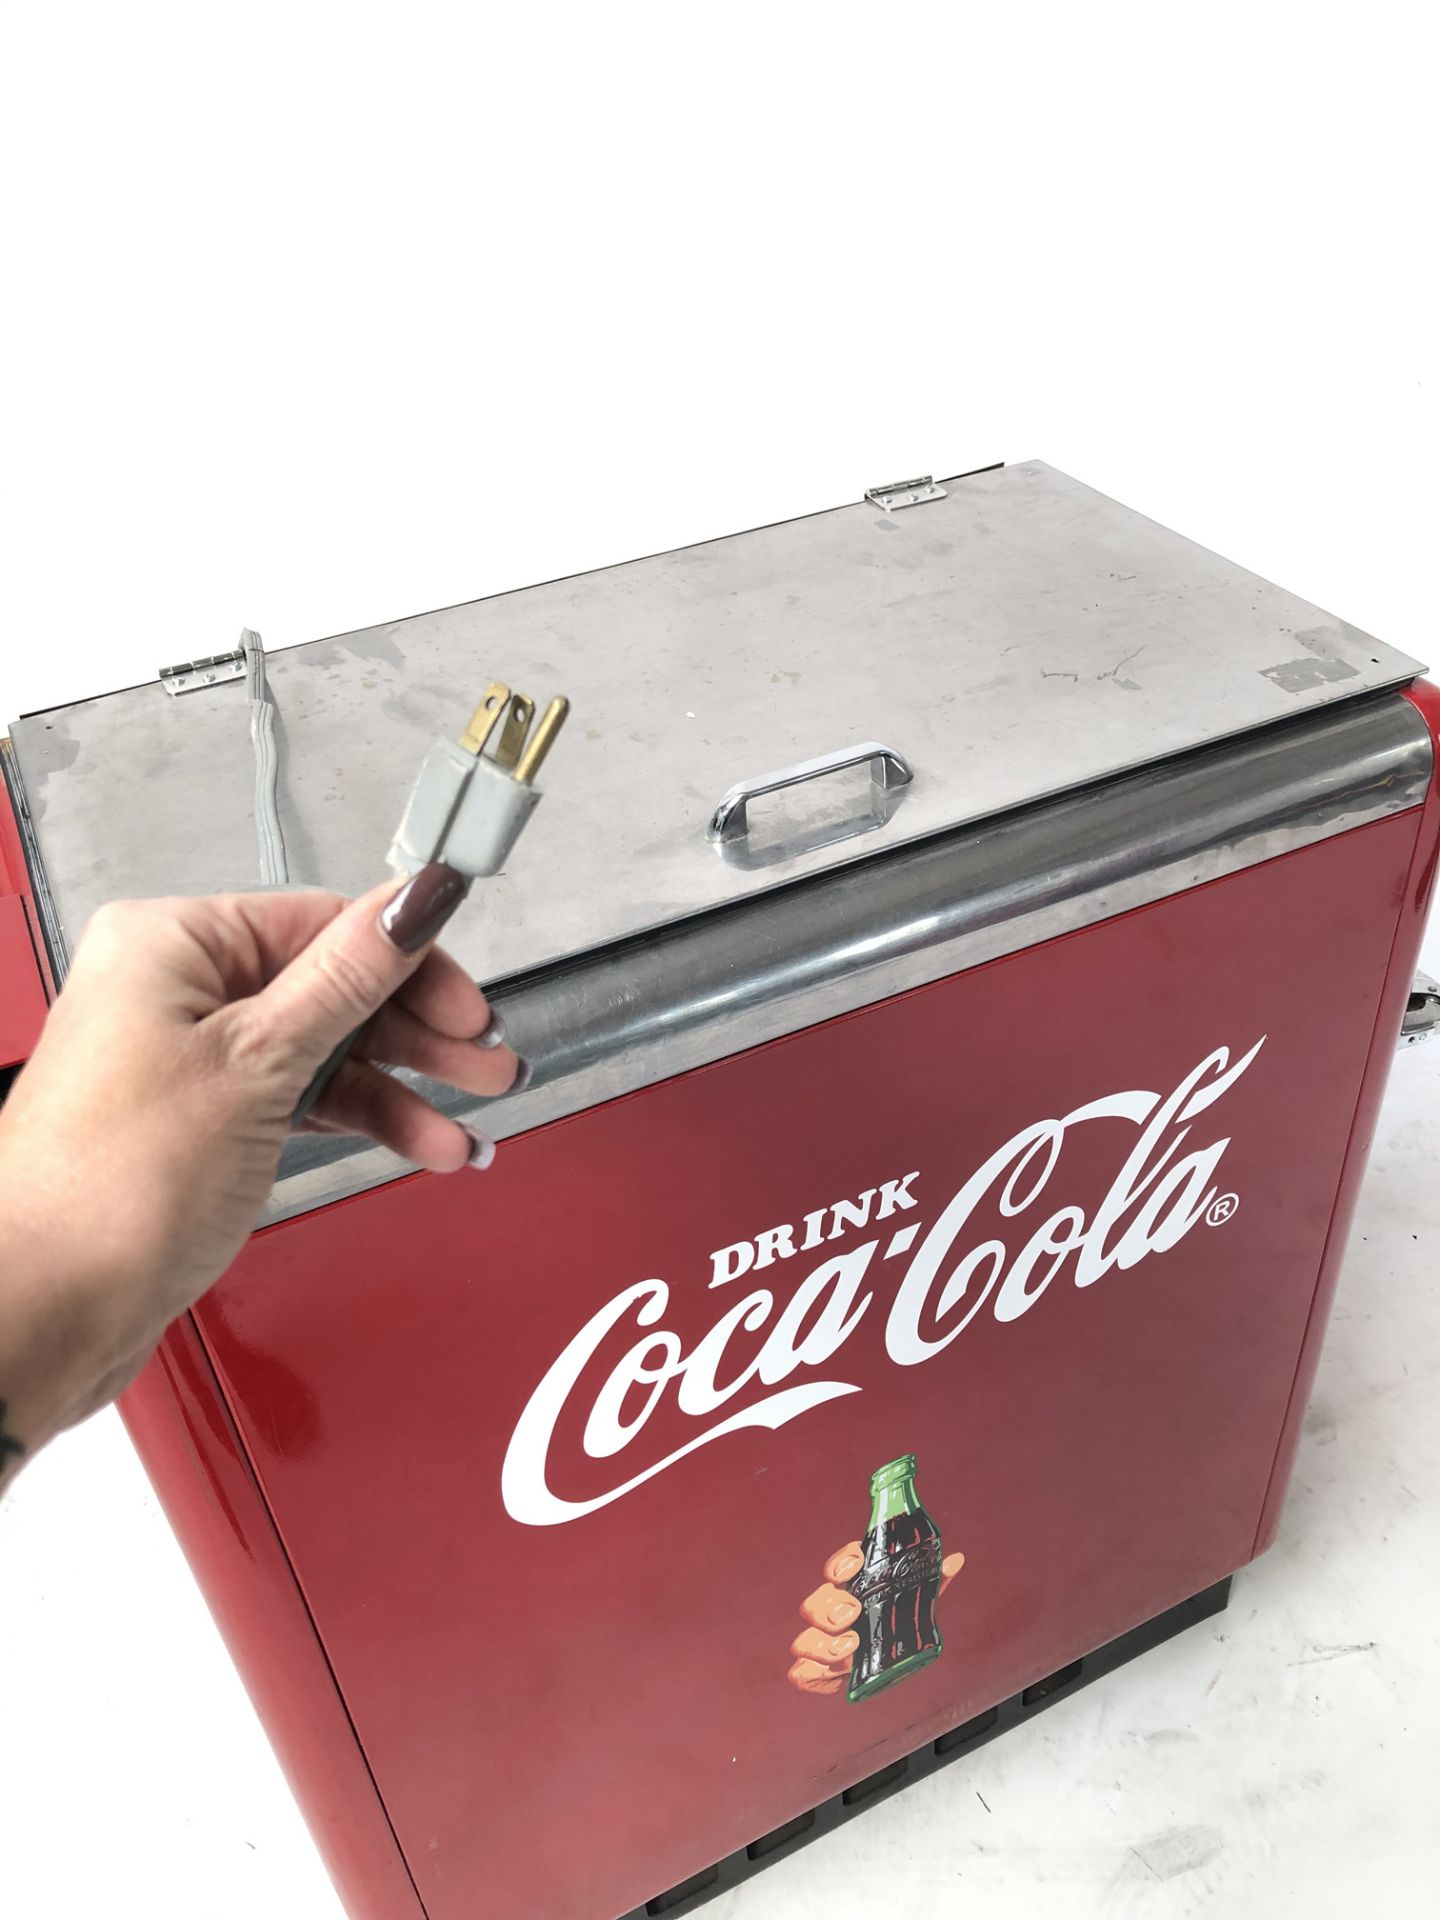 Original Coca-Cola Cooler with Top and Side Access - Image 4 of 7